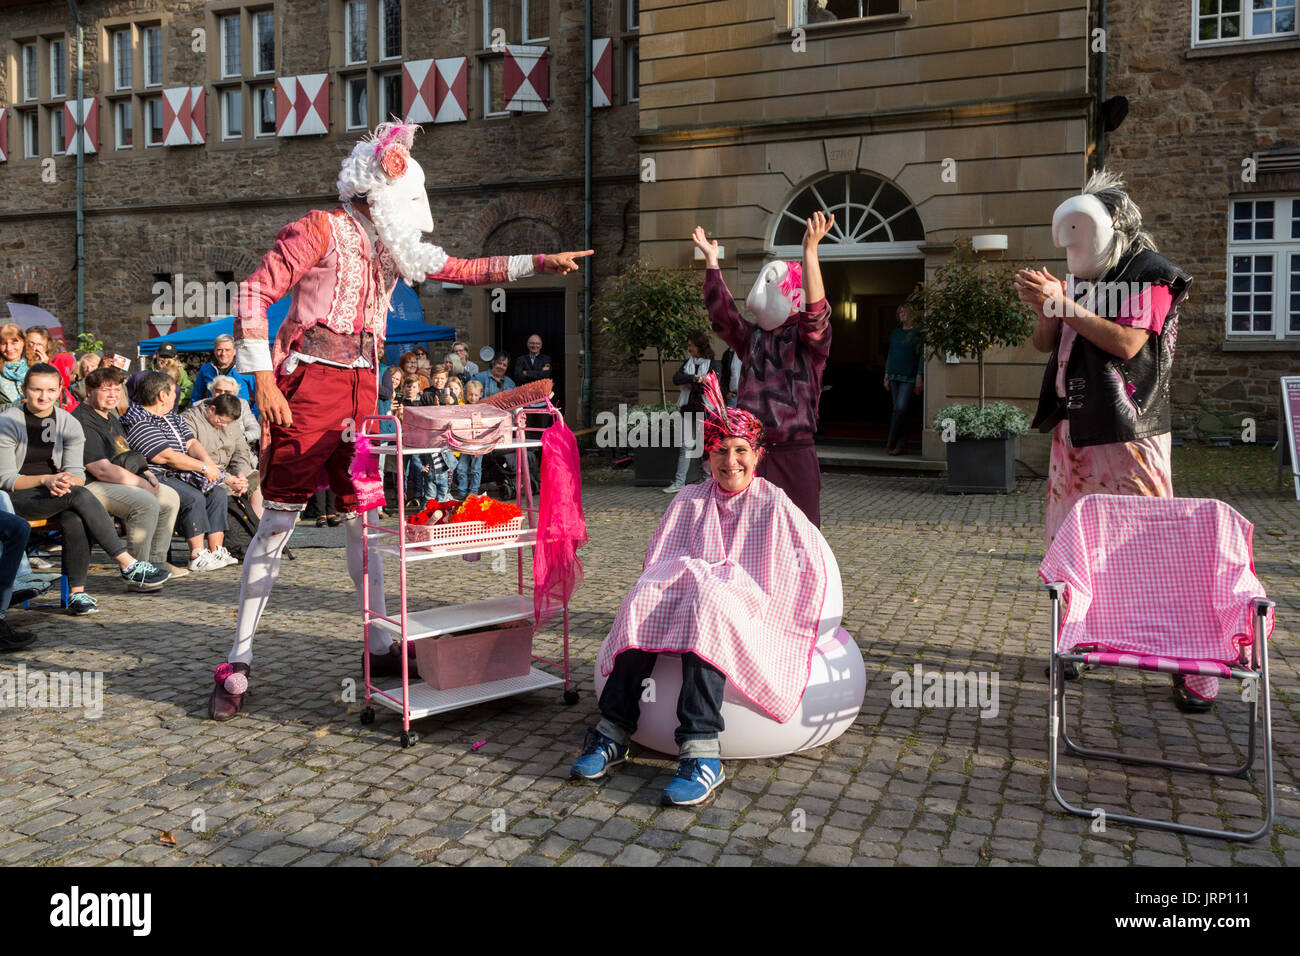 Mülheim an der Ruhr, Germany, 5 August 2017. Members of the Welsh theatre group Hijinx perform 'Pin, Curl & Dyesome' at the Broicher Schlossnacht festival at Schloss Broich castle in Mülheim/Ruhr, Germany. The show with performers from Prestatyn/Wales is set in a quirky and ficticious hair saloon. Photo: Bettina Strenske/Alamy Live News Stock Photo